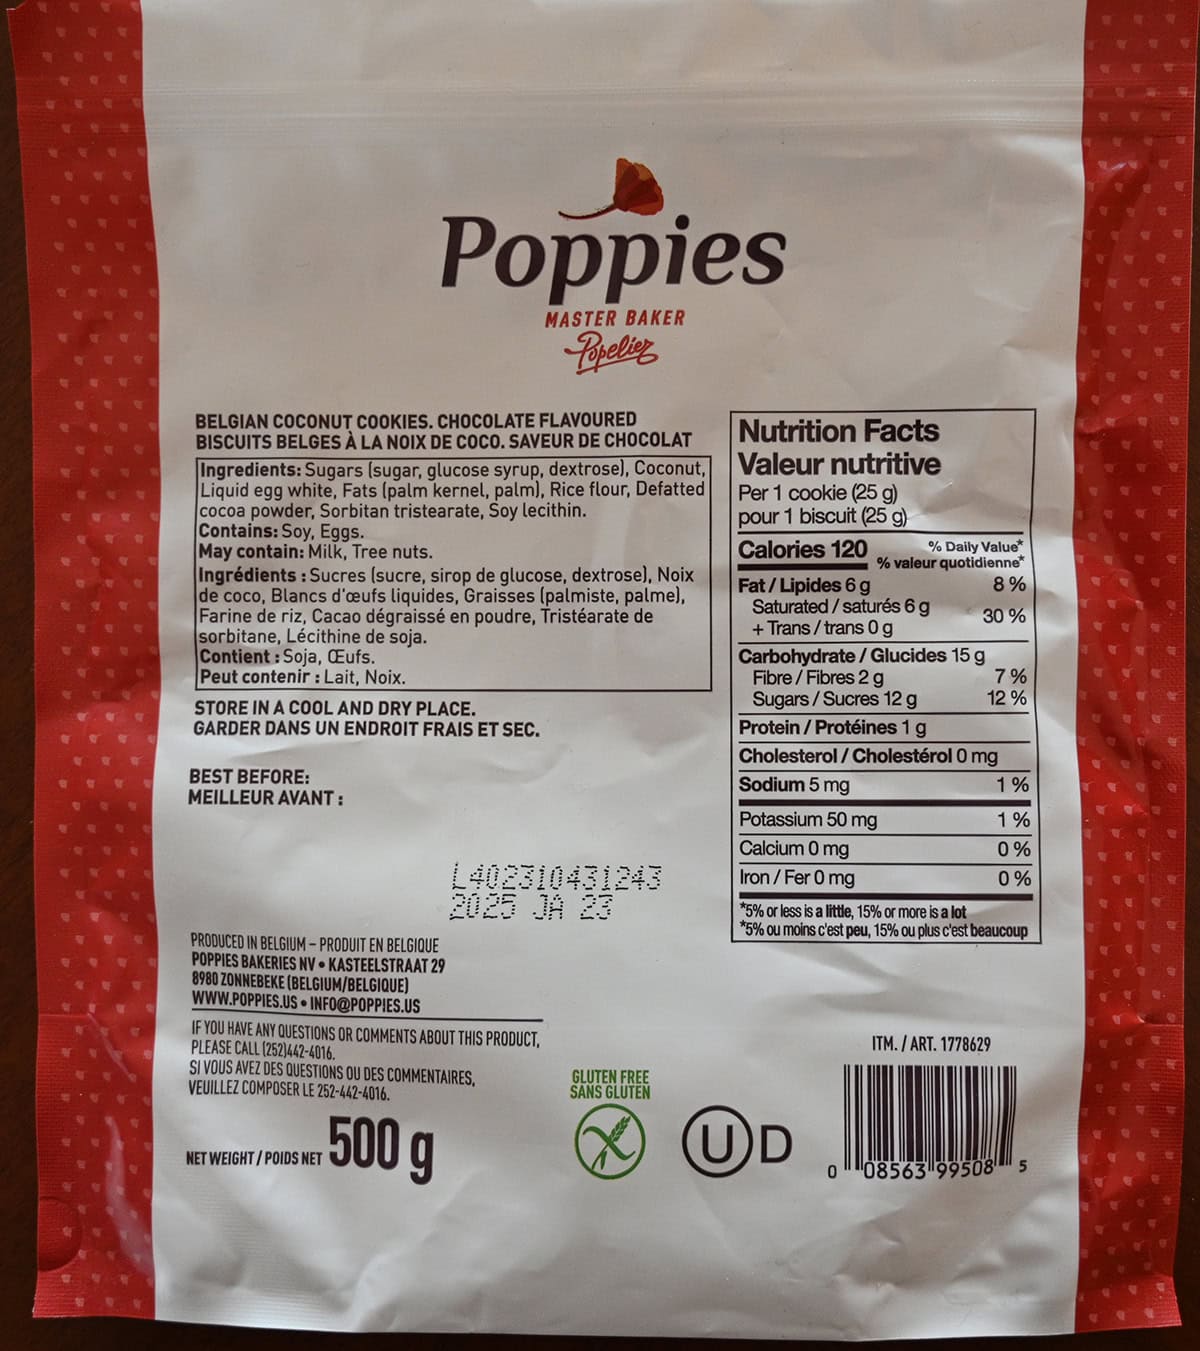 Image of the back of the bag of Poppies showing the nutrition facts, ingredients and where the cookies are made.